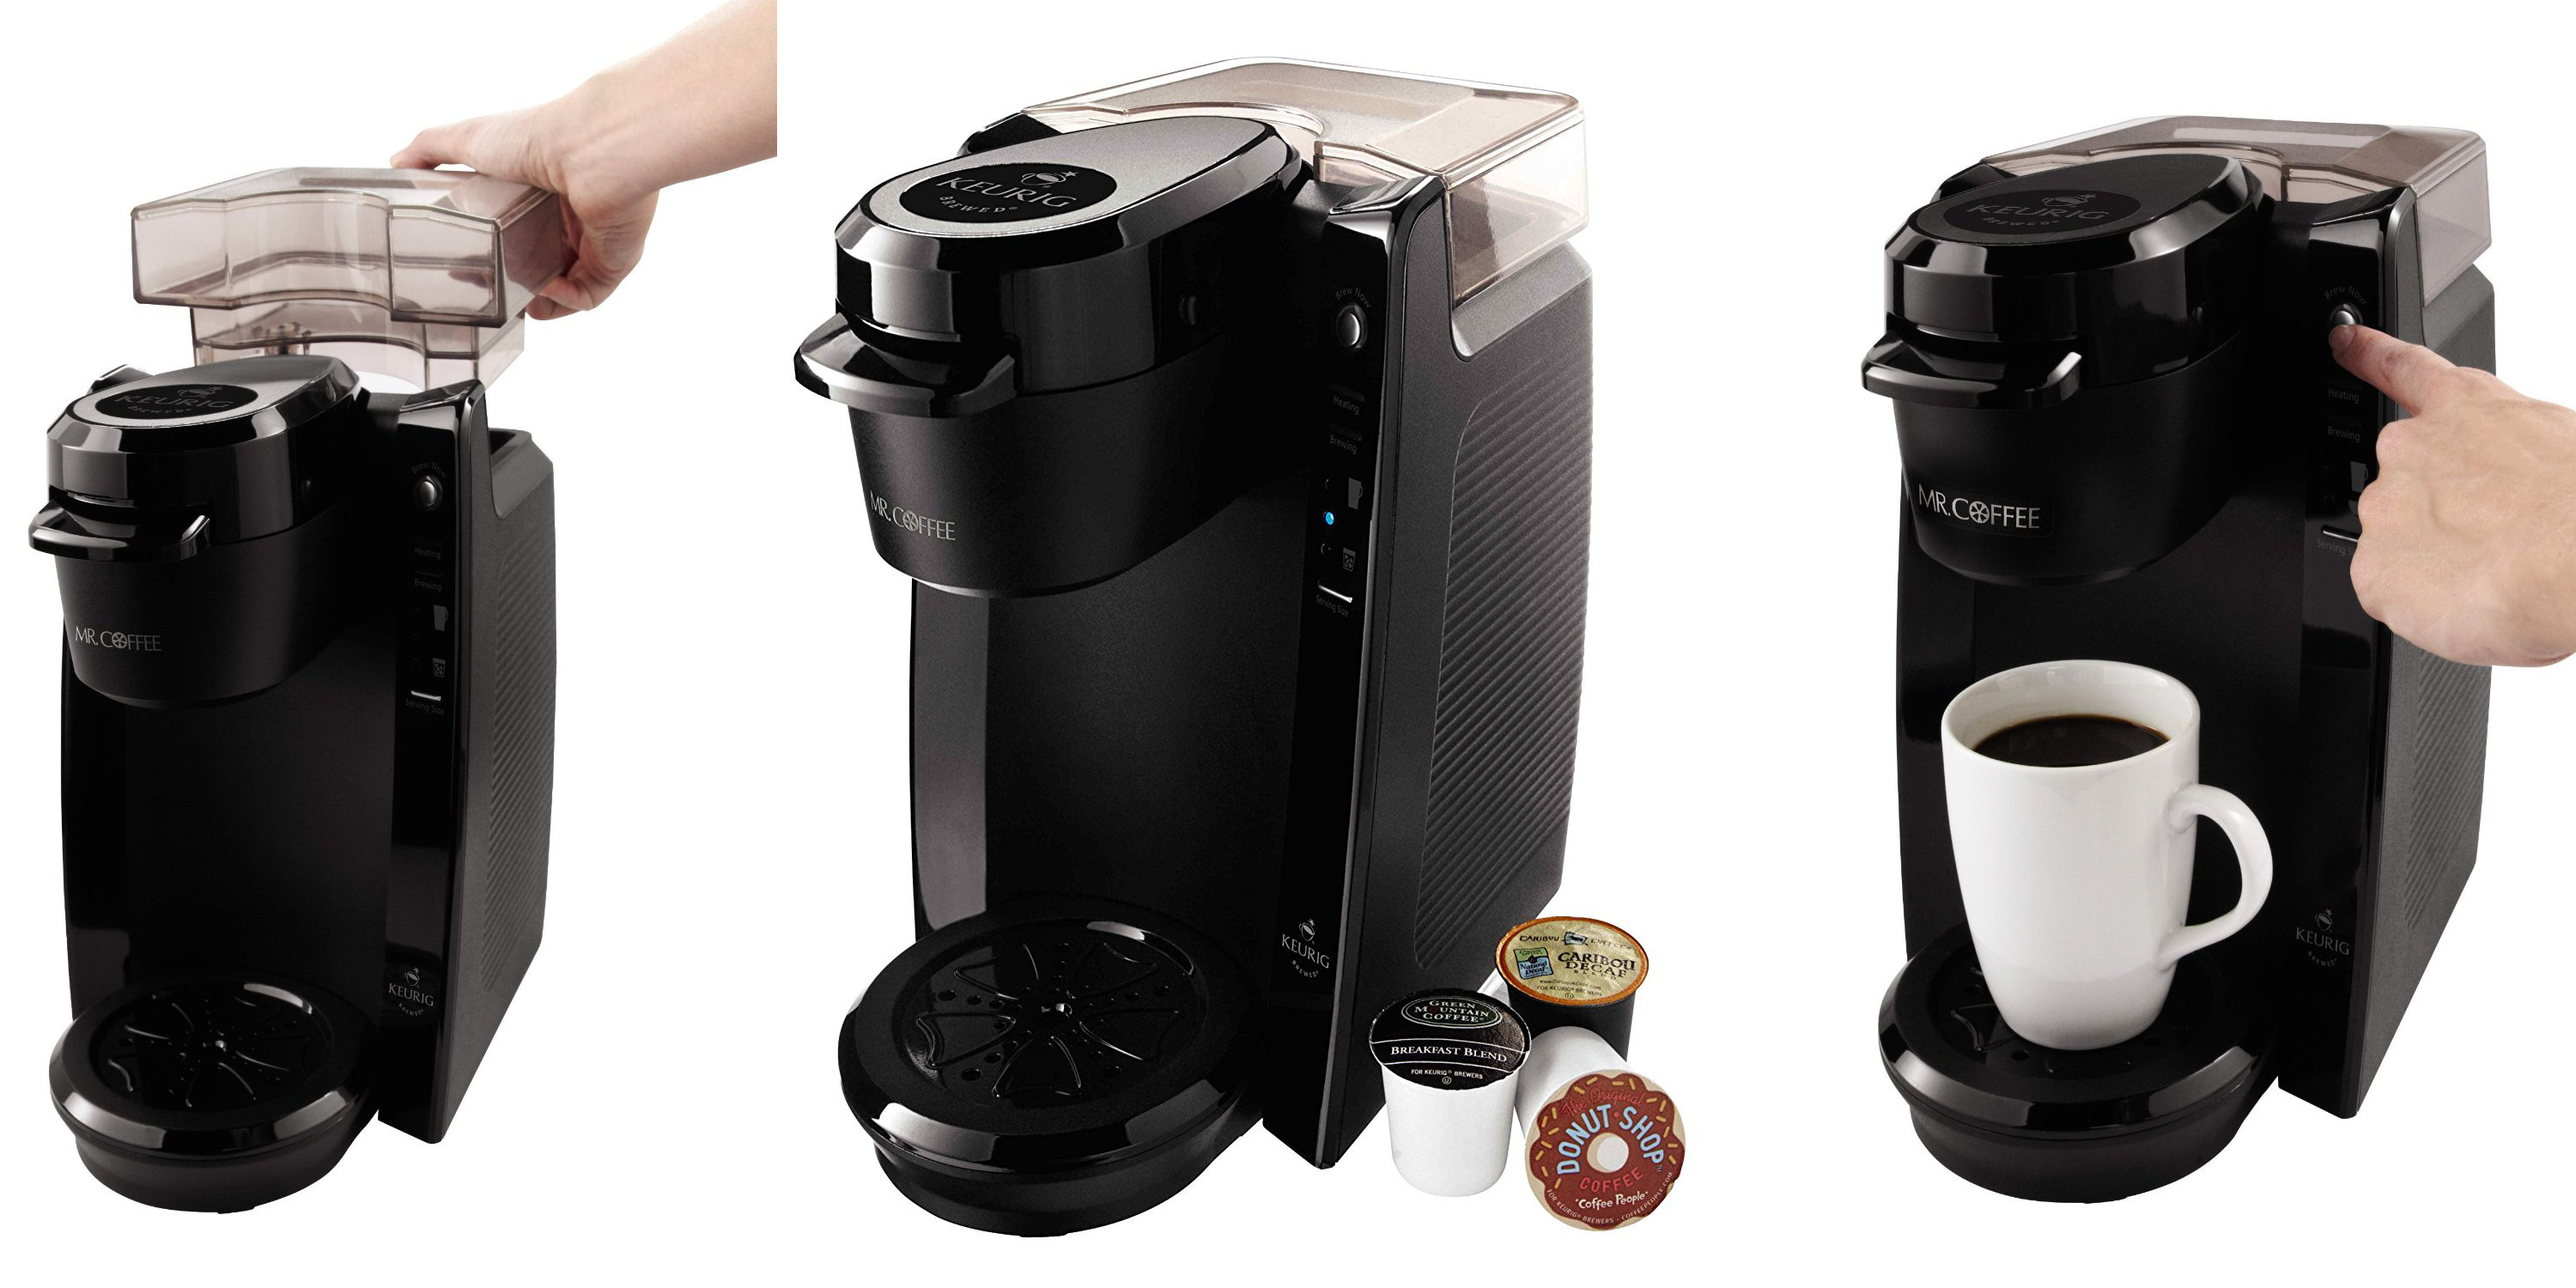 Mr. Coffee Single Serve Coffee Brewer for use with Keurig K-Cups